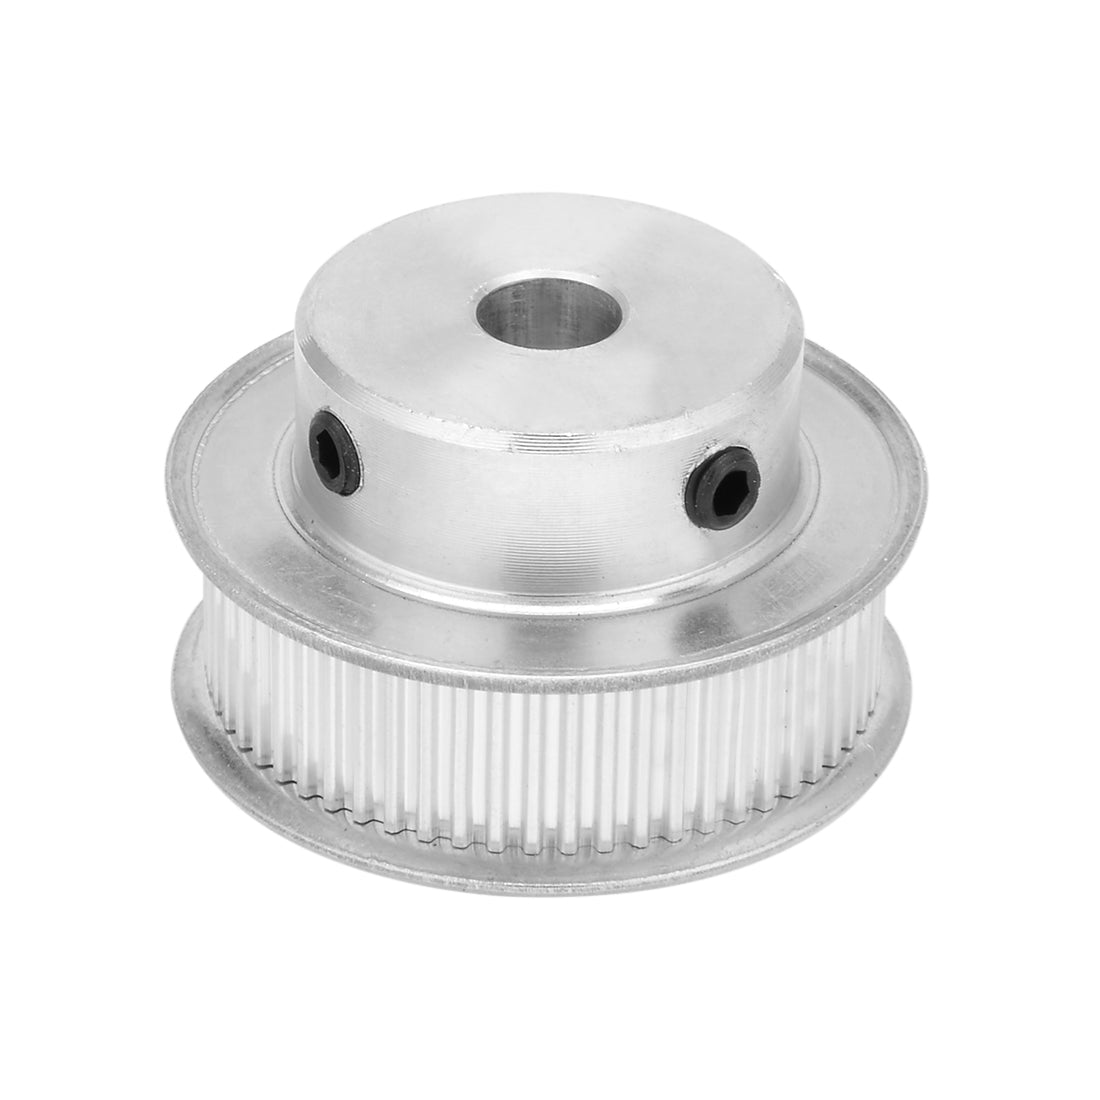 uxcell Uxcell Aluminum M-X-L 60 Teeth 8mm Bore Timing Belt Idler Pulley Synchronous Wheel 10mm Belt for 3D Printer CNC